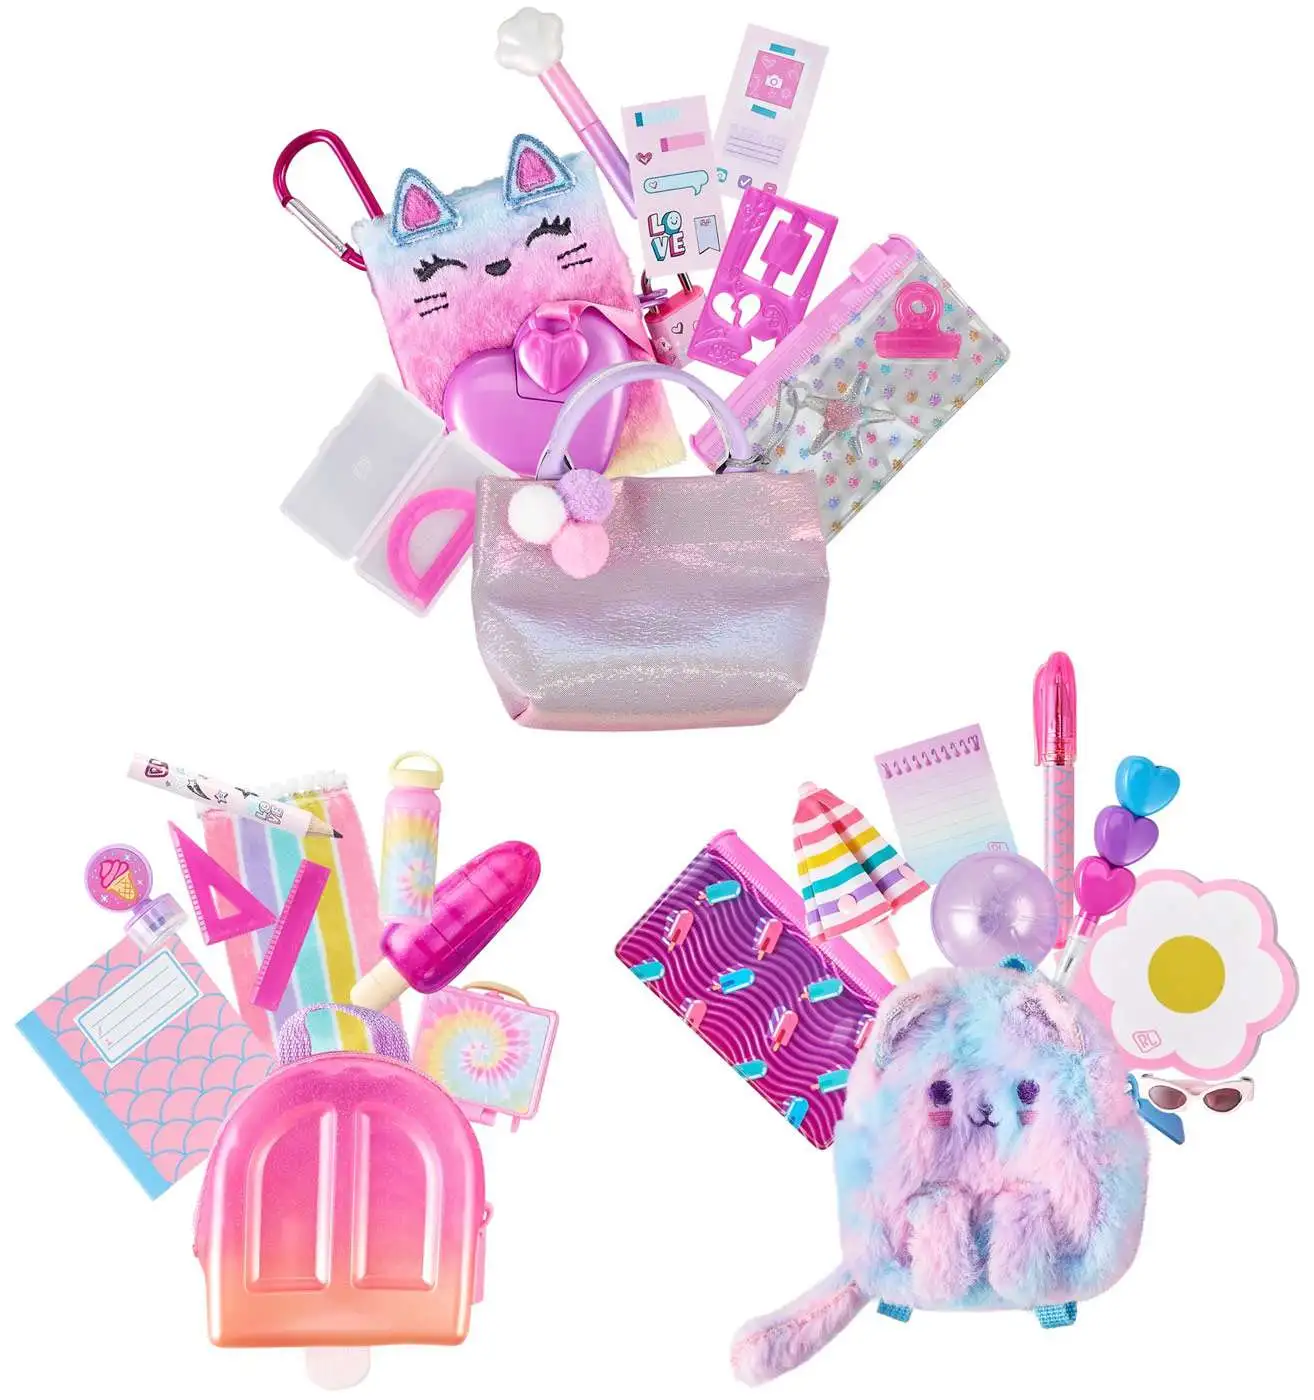 Shopkins Real Littles Backpacks Micro To-Go Exclusive Set 2 Backpacks,  Beachbag Journal, 20 Items in Total Moose Toys - ToyWiz